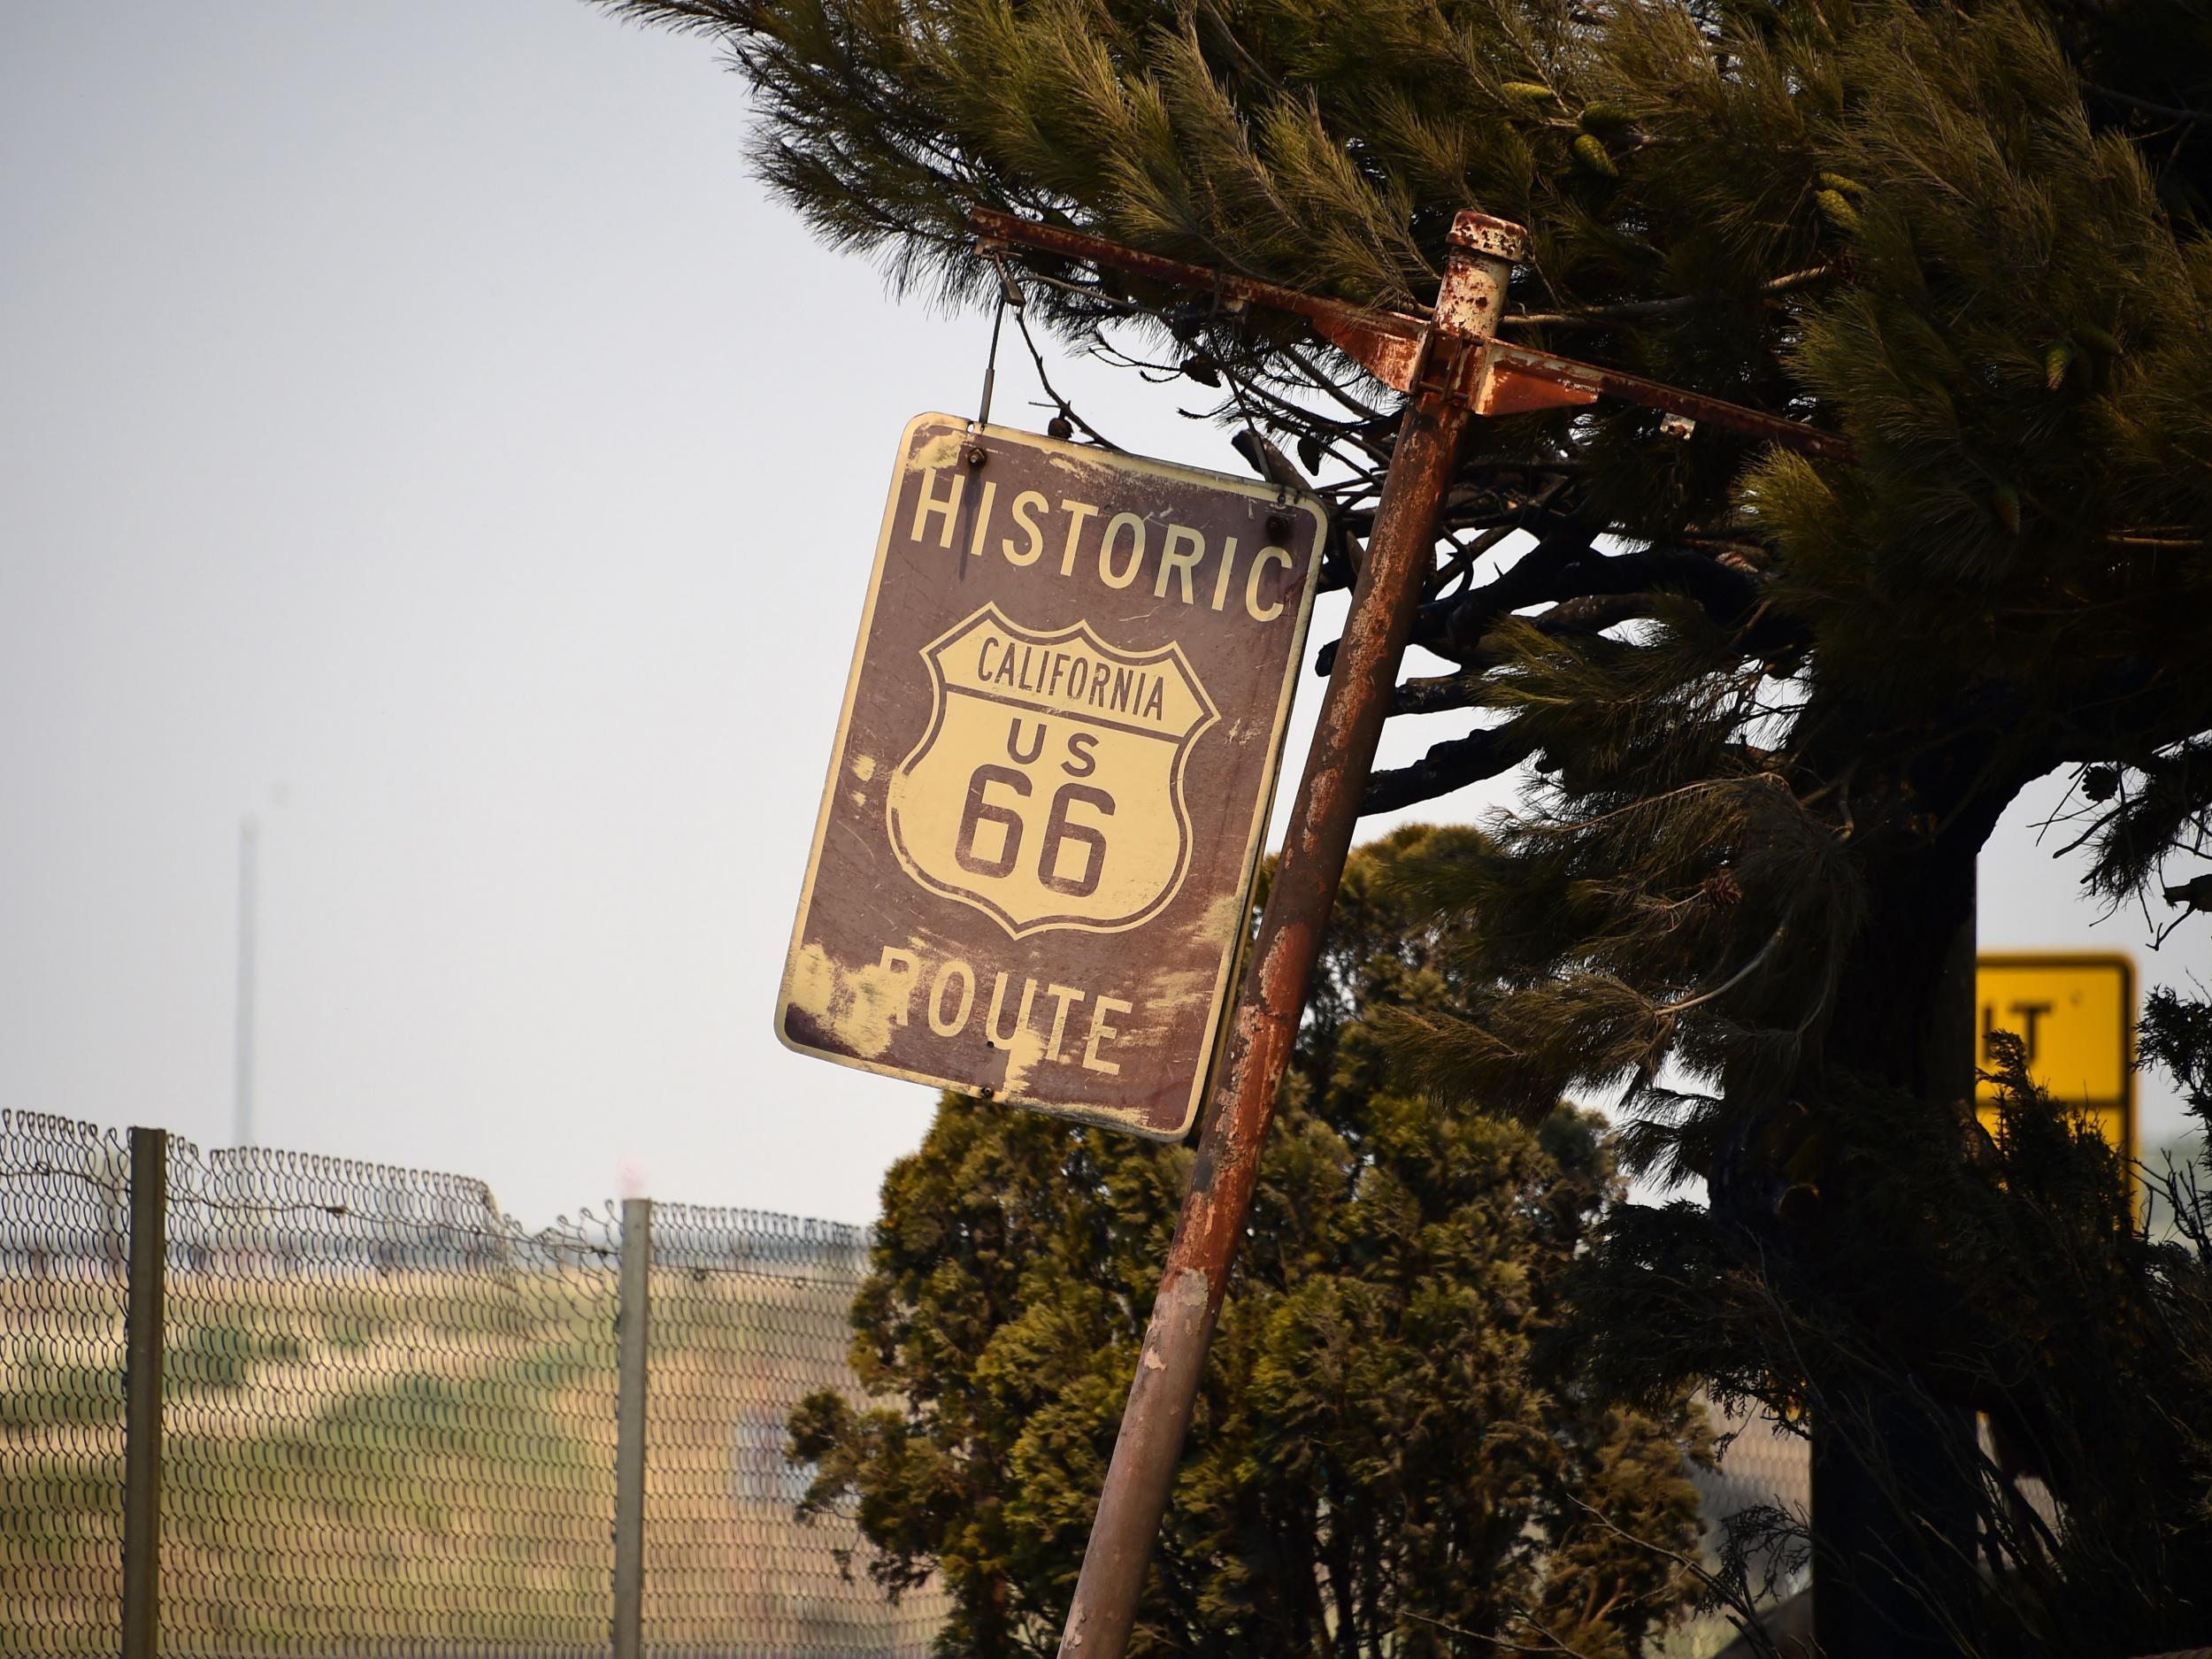 Route 66 is commonly referred to as America's 'mother road'